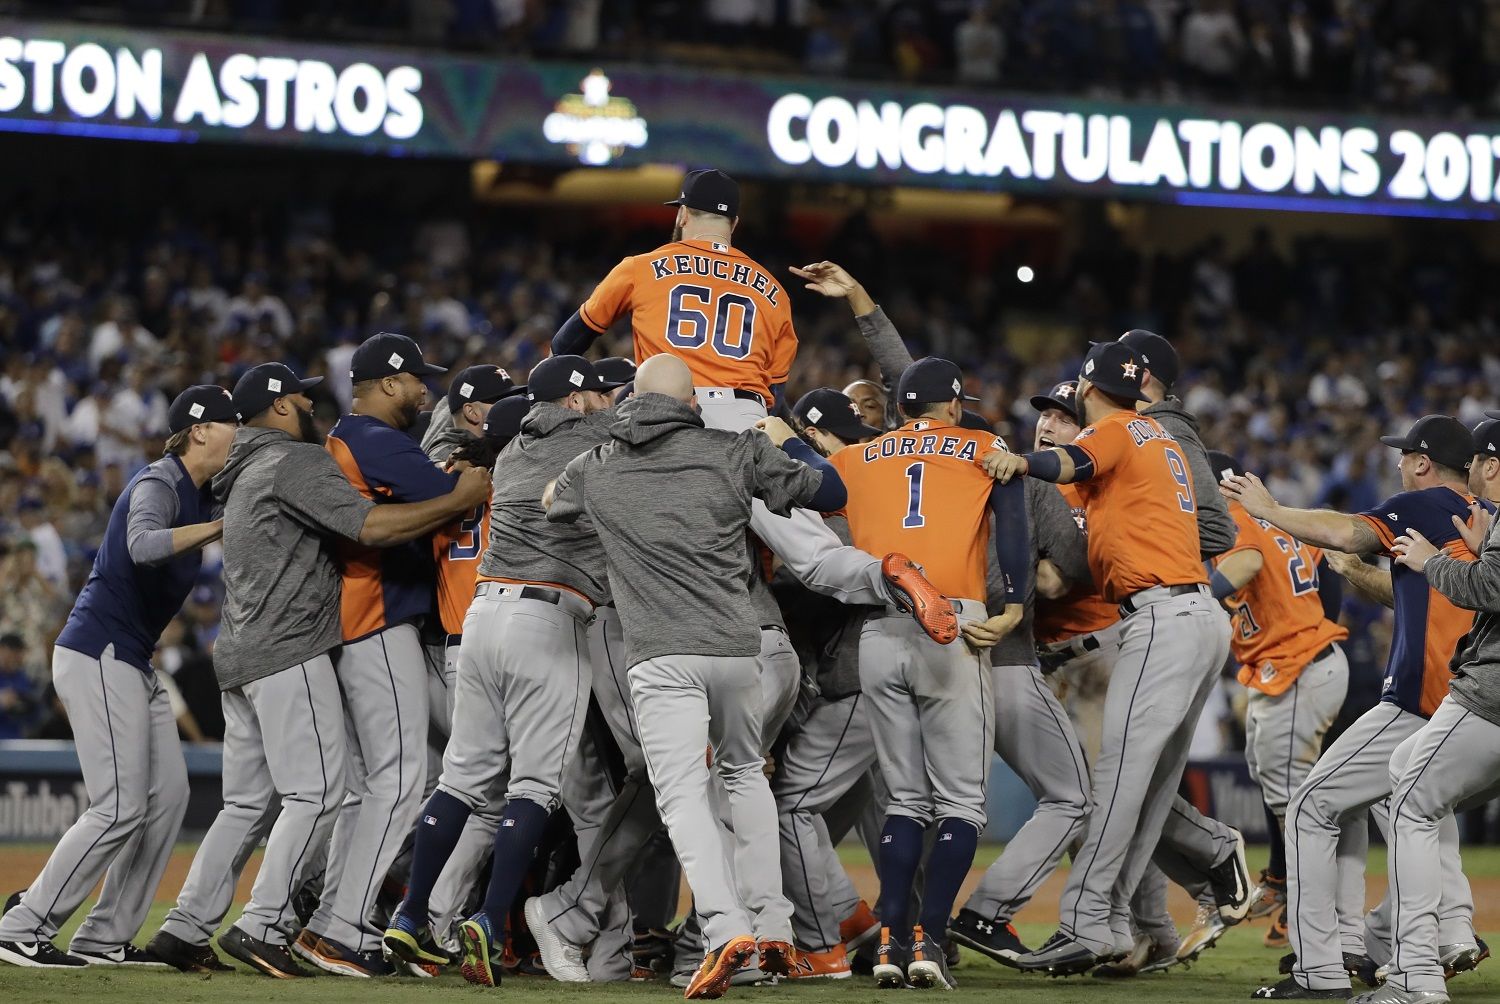 The Houston Astros celebrate after Game 7 of baseball's World Series against the Los Angeles Dodgers Wednesday, Nov. 1, 2017, in Los Angeles. The Astros won 5-1 to win the series 4-3. (AP Photo/David J. Phillip)